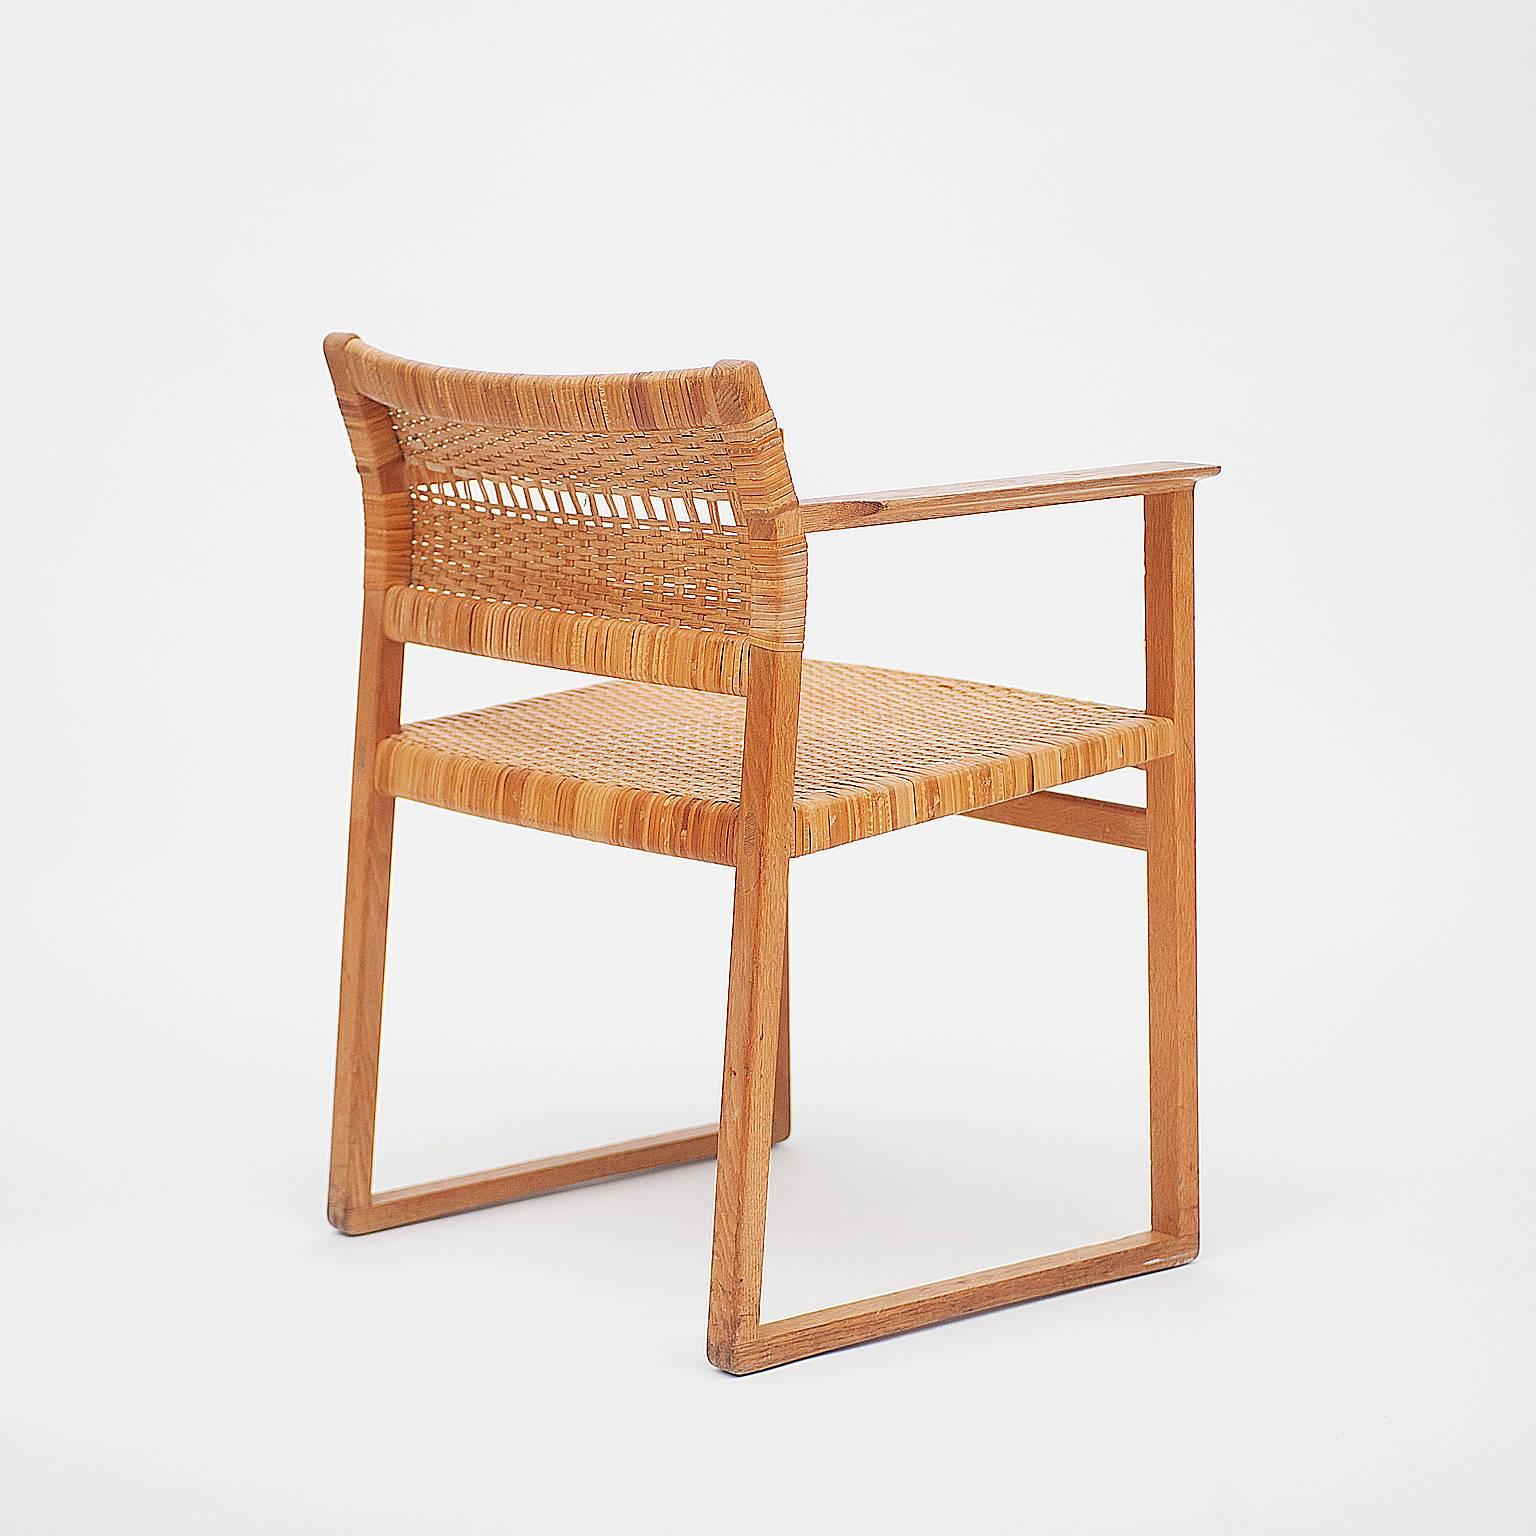 Woven Børge Mogensen armchairs with leather cushions